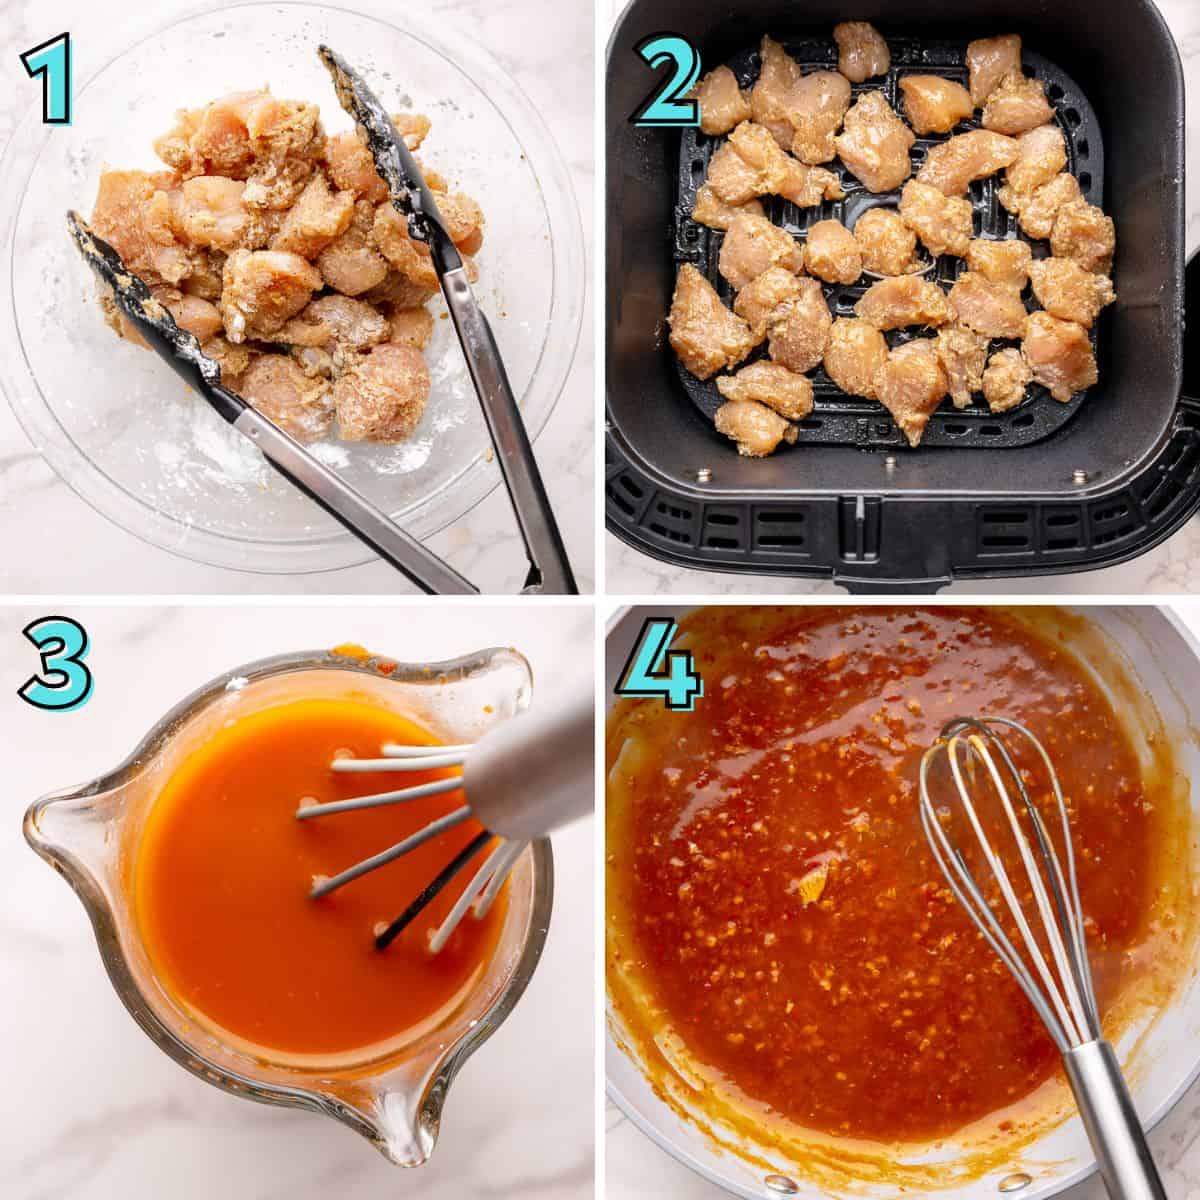 Step-by-step recipe instructions in a collage.